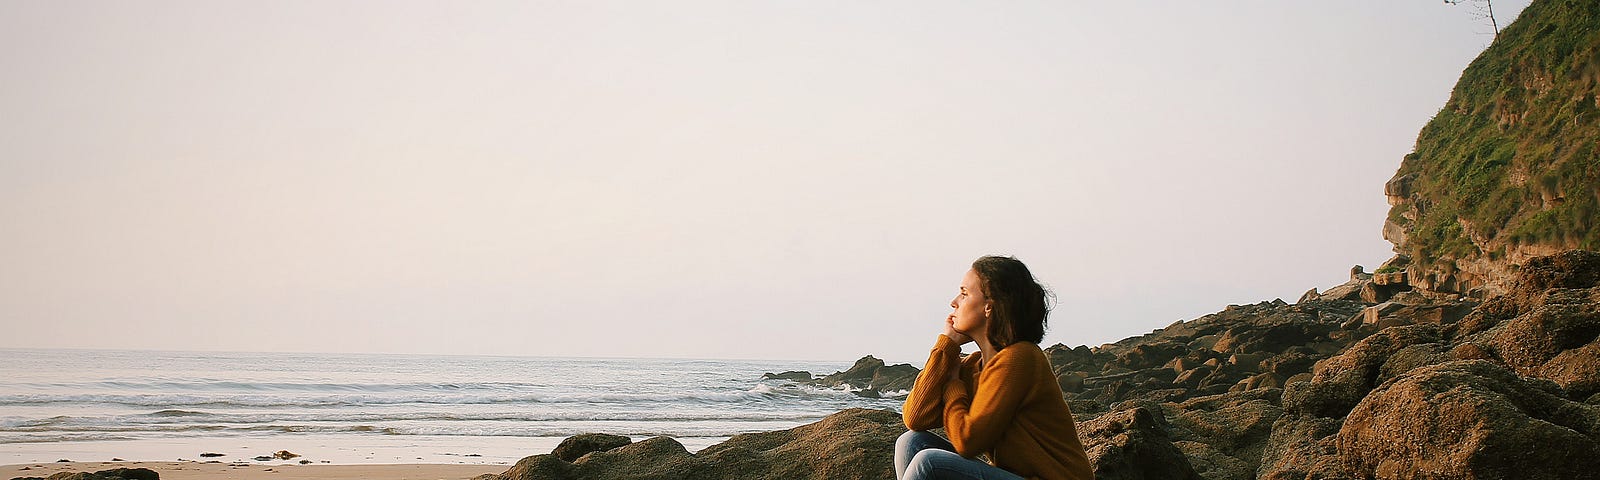 Woman sitting on beach looking off into the distance.